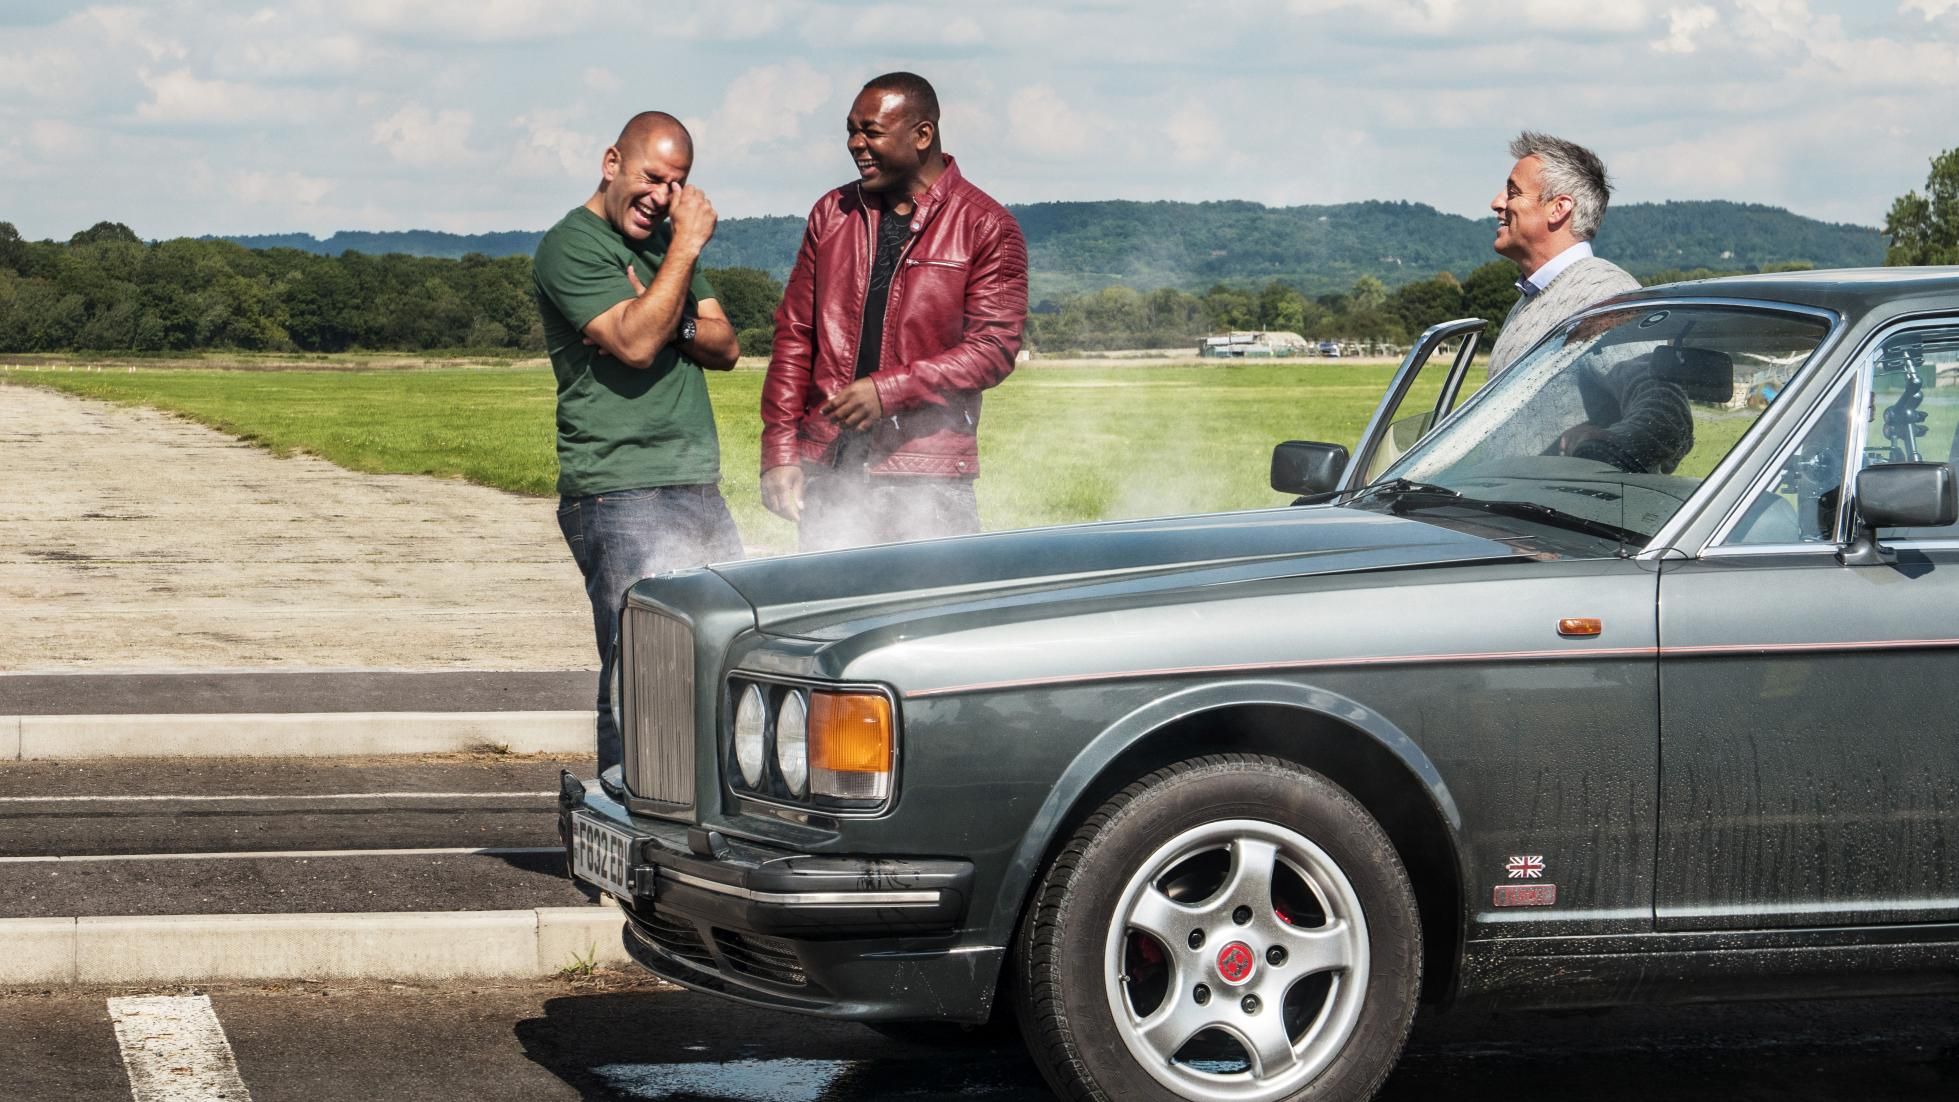 Snestorm Udseende klæde Top Gear Is Back for Season 26, and Here's How You Can Watch It